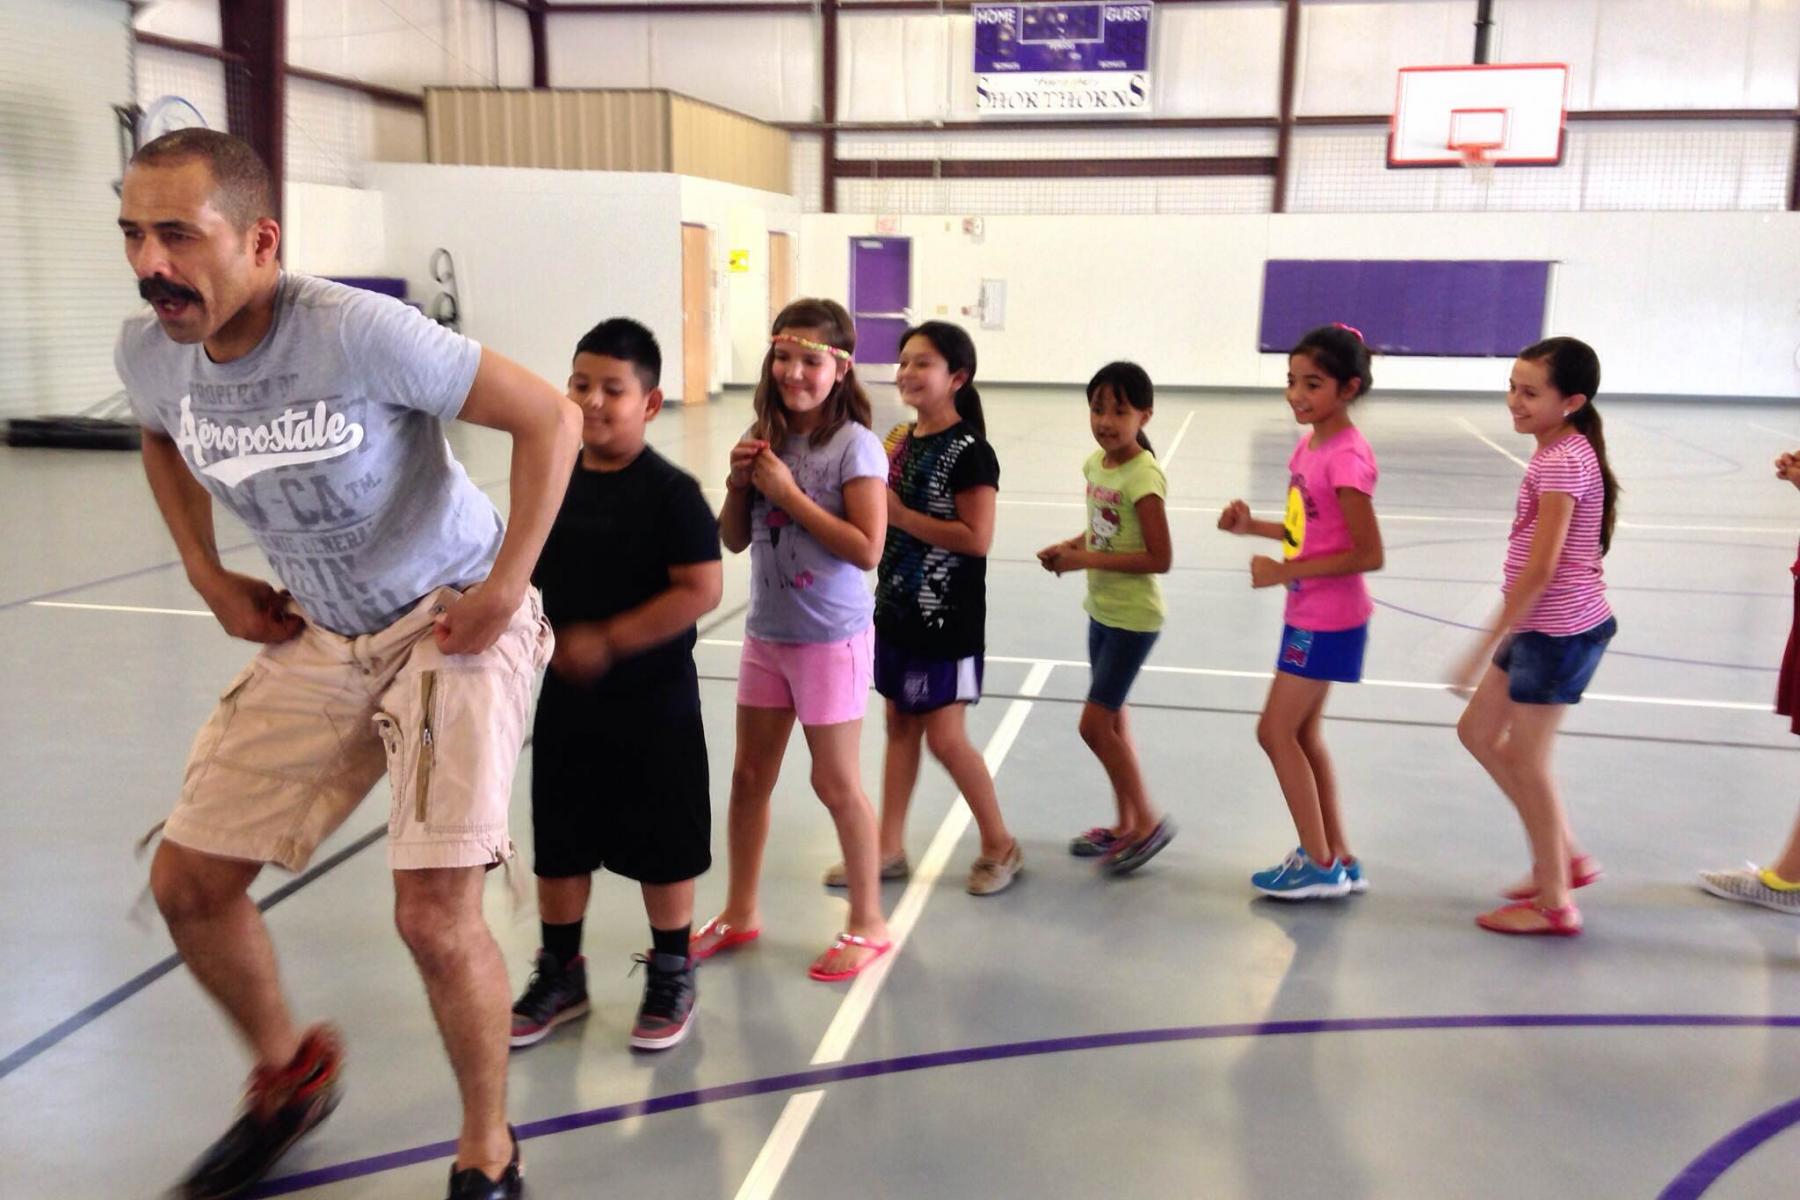 Kahil El'Zabar leading students at the Music Moves U workshop, June 17, 2014. Photo by Suzy Simon.